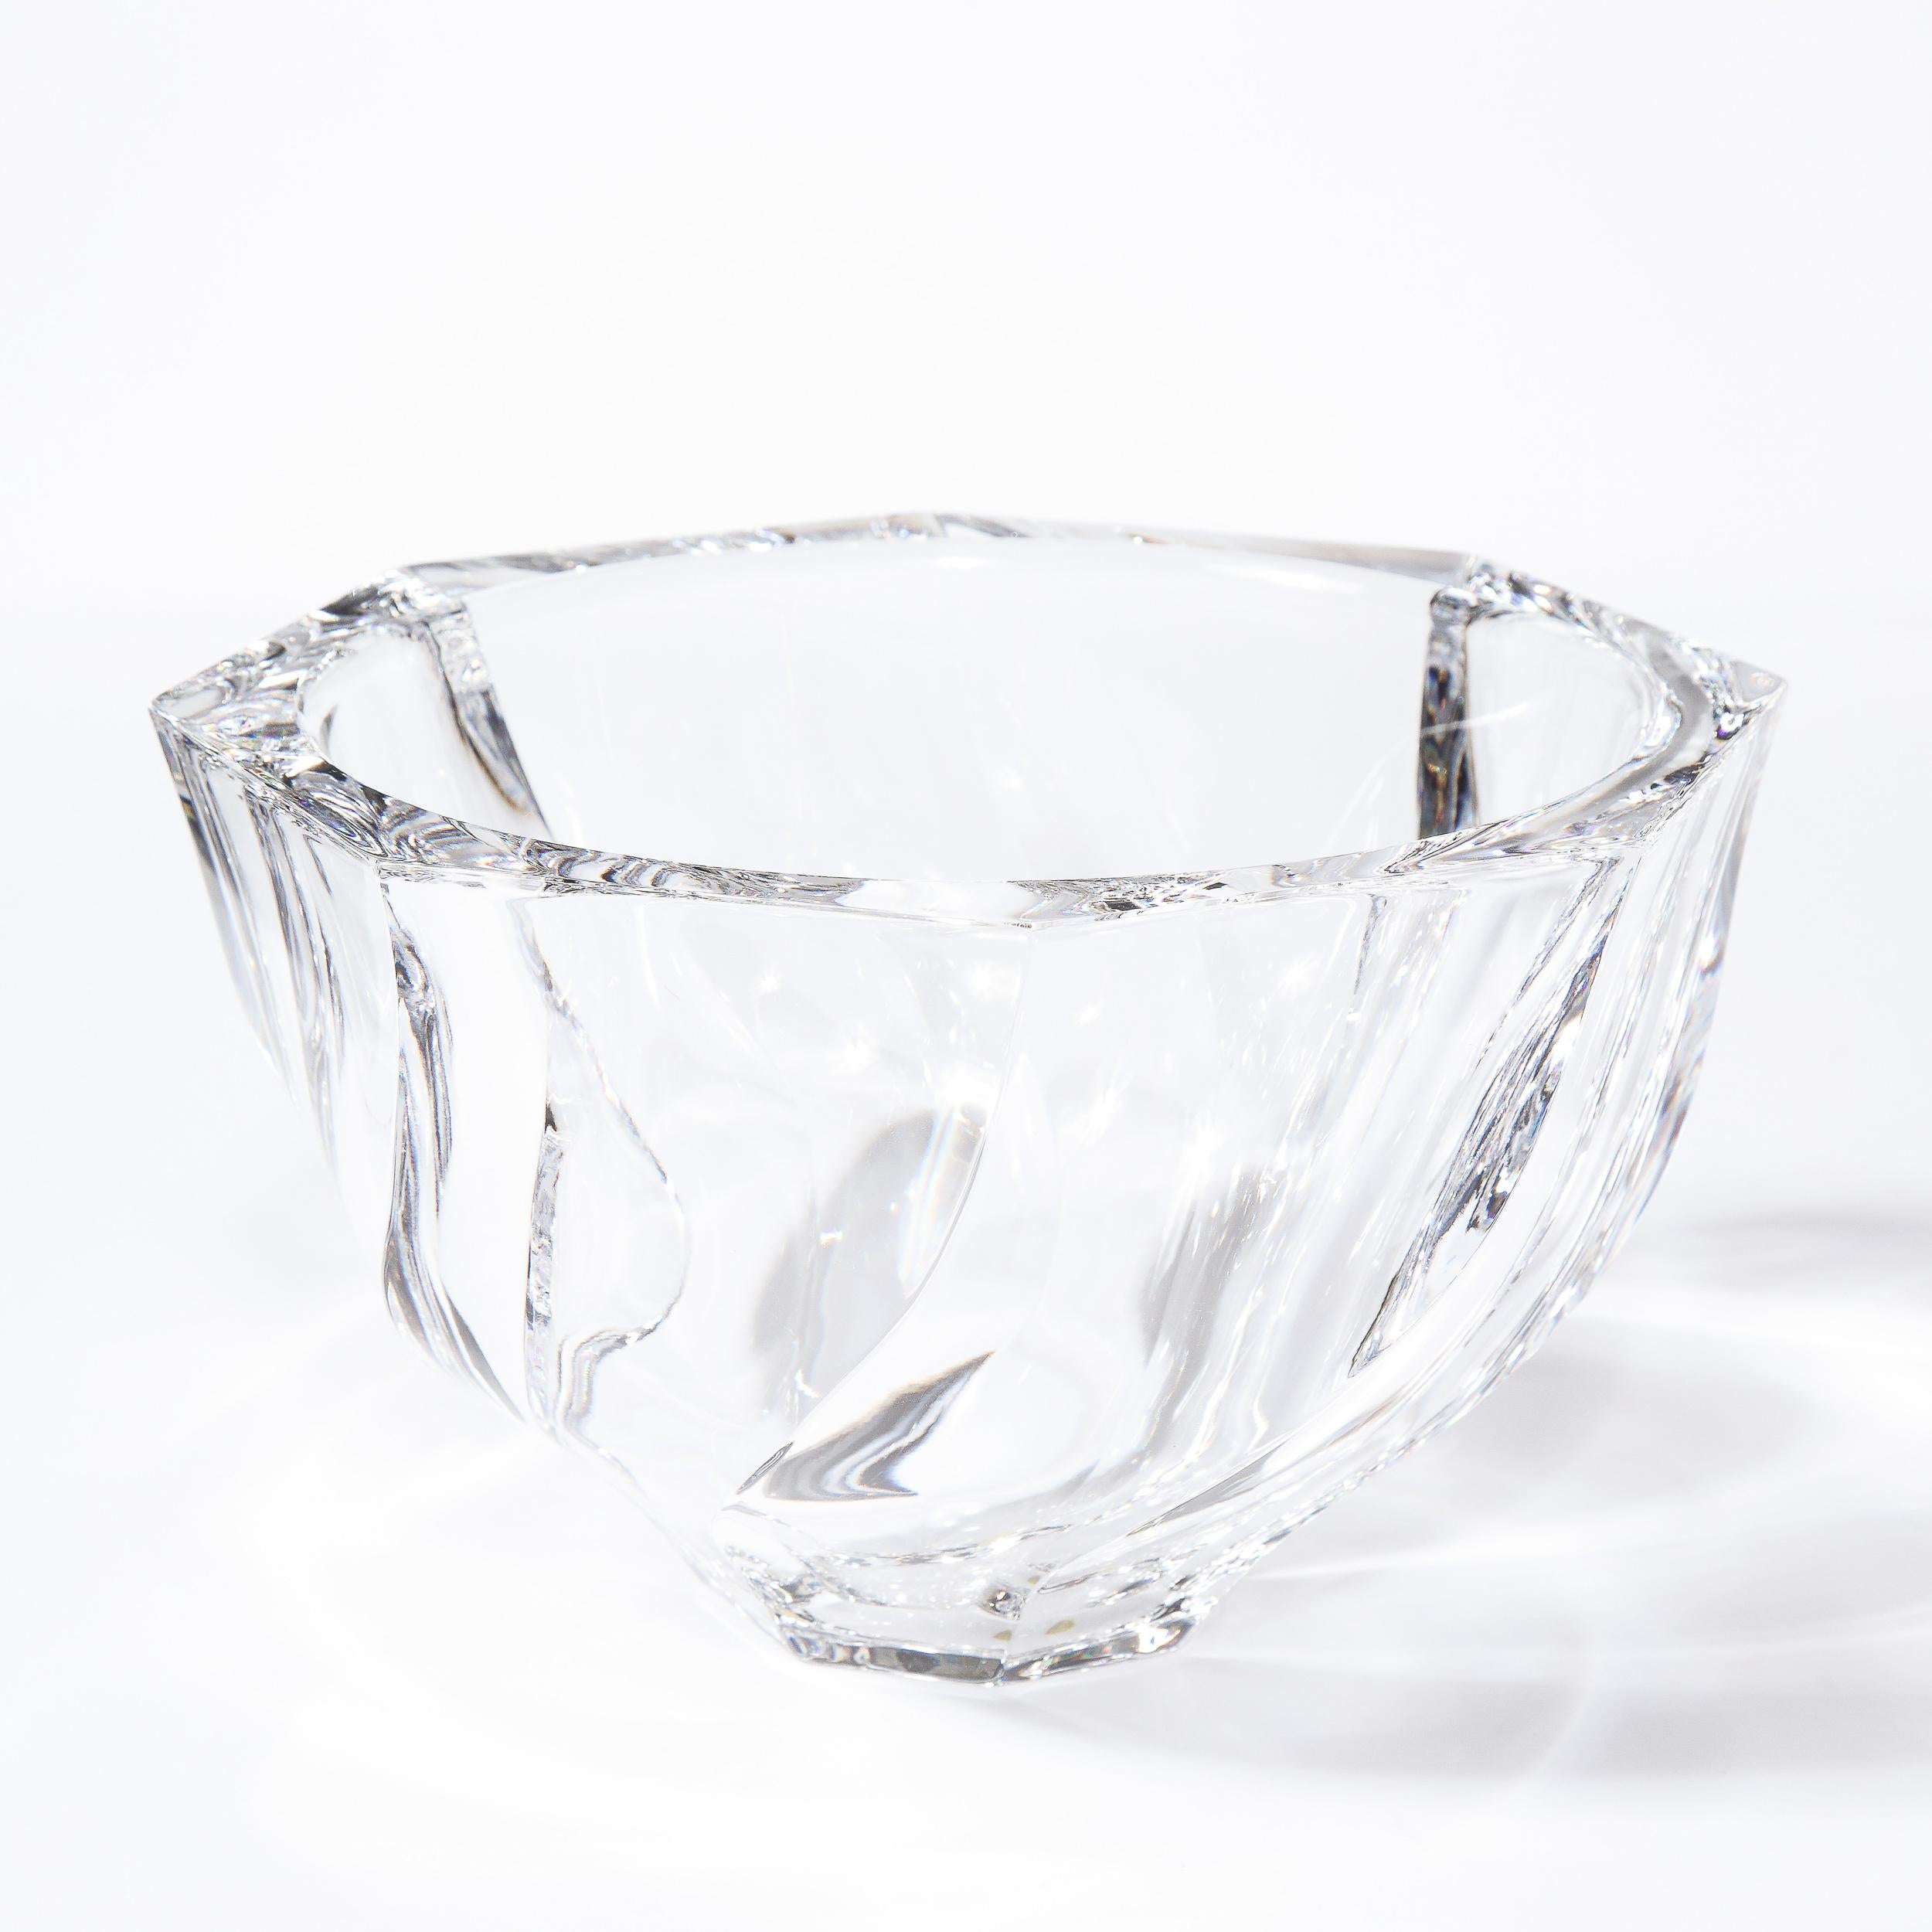 This refined modernist bowl was realized in Sweden by the renowned maker Orrefors. It features an octagonal mouth and undulating curved faceted sides in translucent glass. This piece offers the significant heft that one expects of a luxury object of